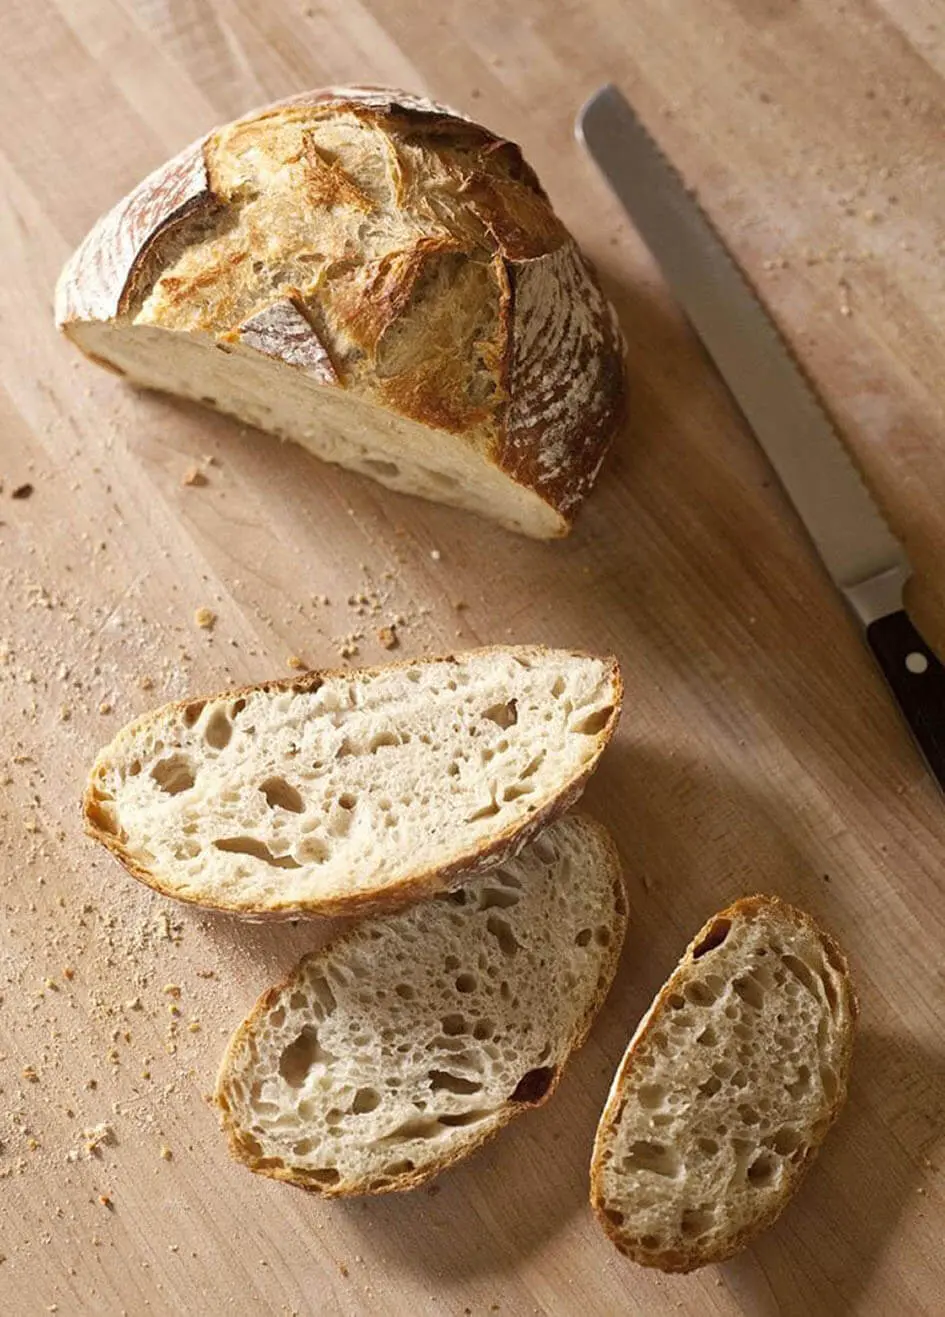 Sliced Yeast bread loaf made from Gold Medal Flour on a cutting board with knife ready for serving.